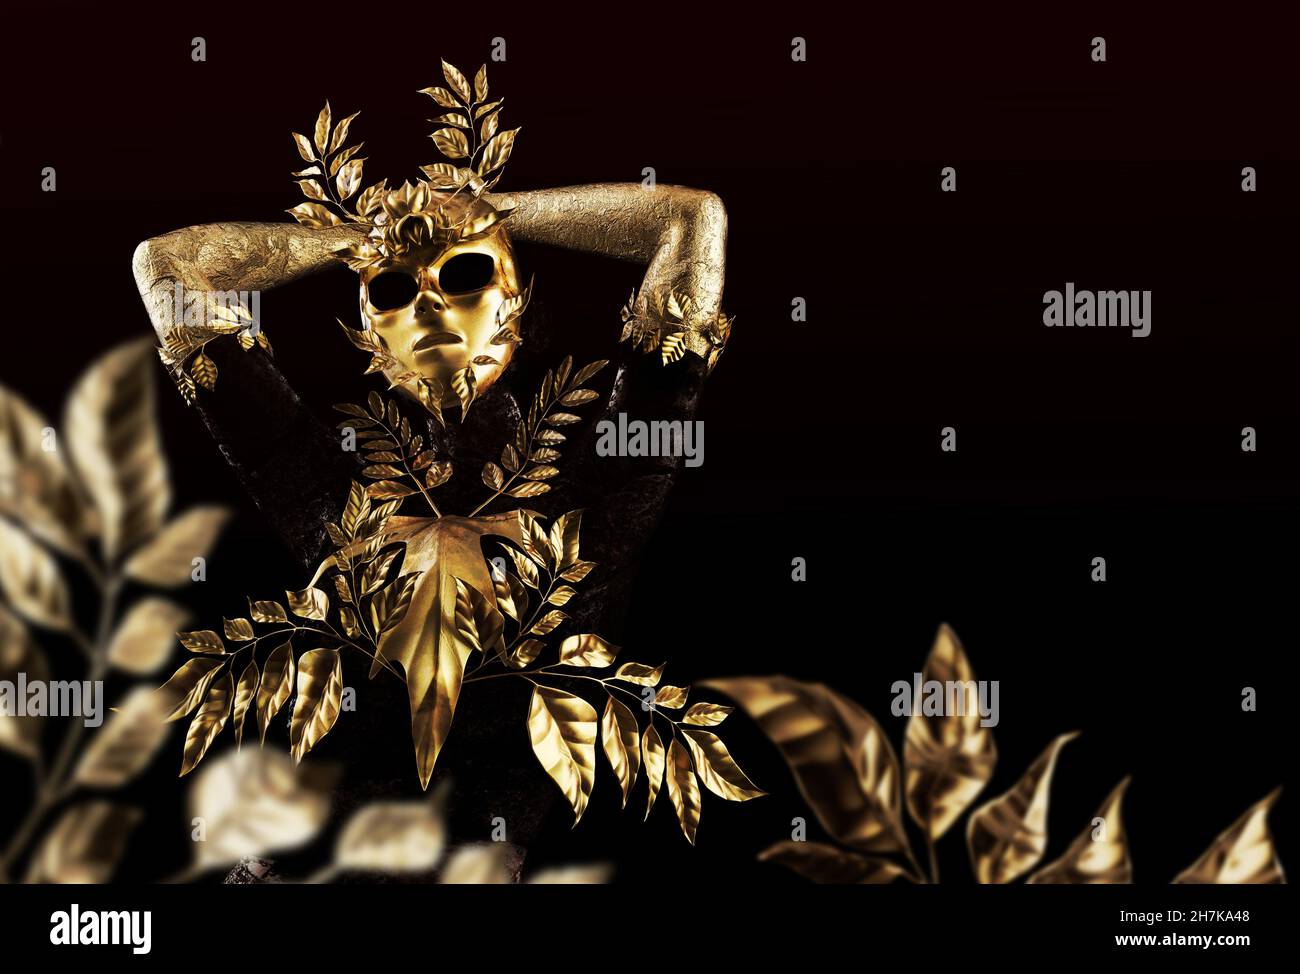 3d render illustration of female nature nymph goddess statue in golden mask and leaf outfit on dark background, carnival concept. Stock Photo